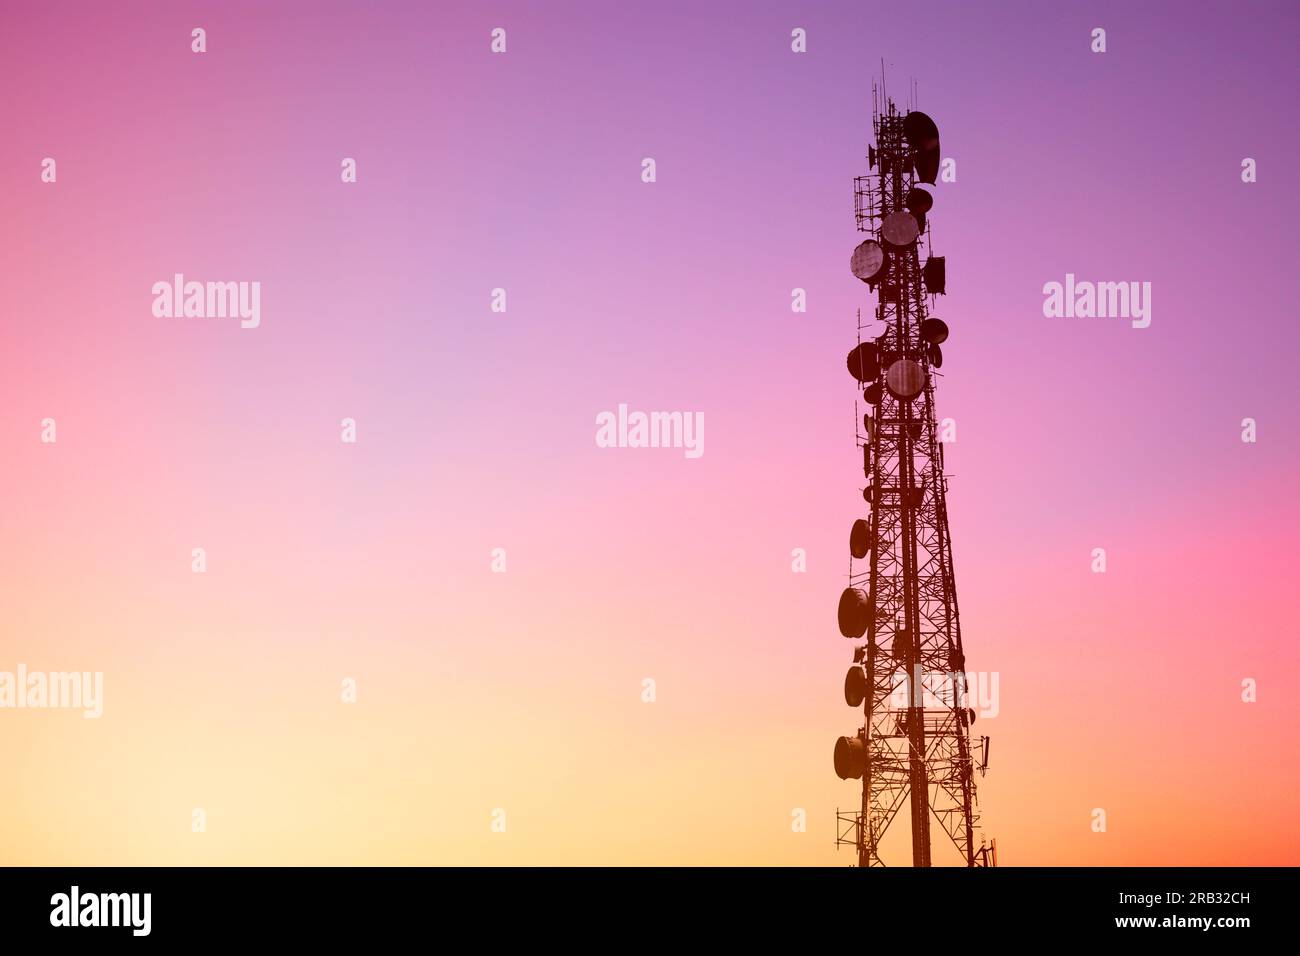 4G or 5G digital data telecommunication tower network telephone cell site with blank dusk sky copy space for text, communication internet infrastructu Stock Photo